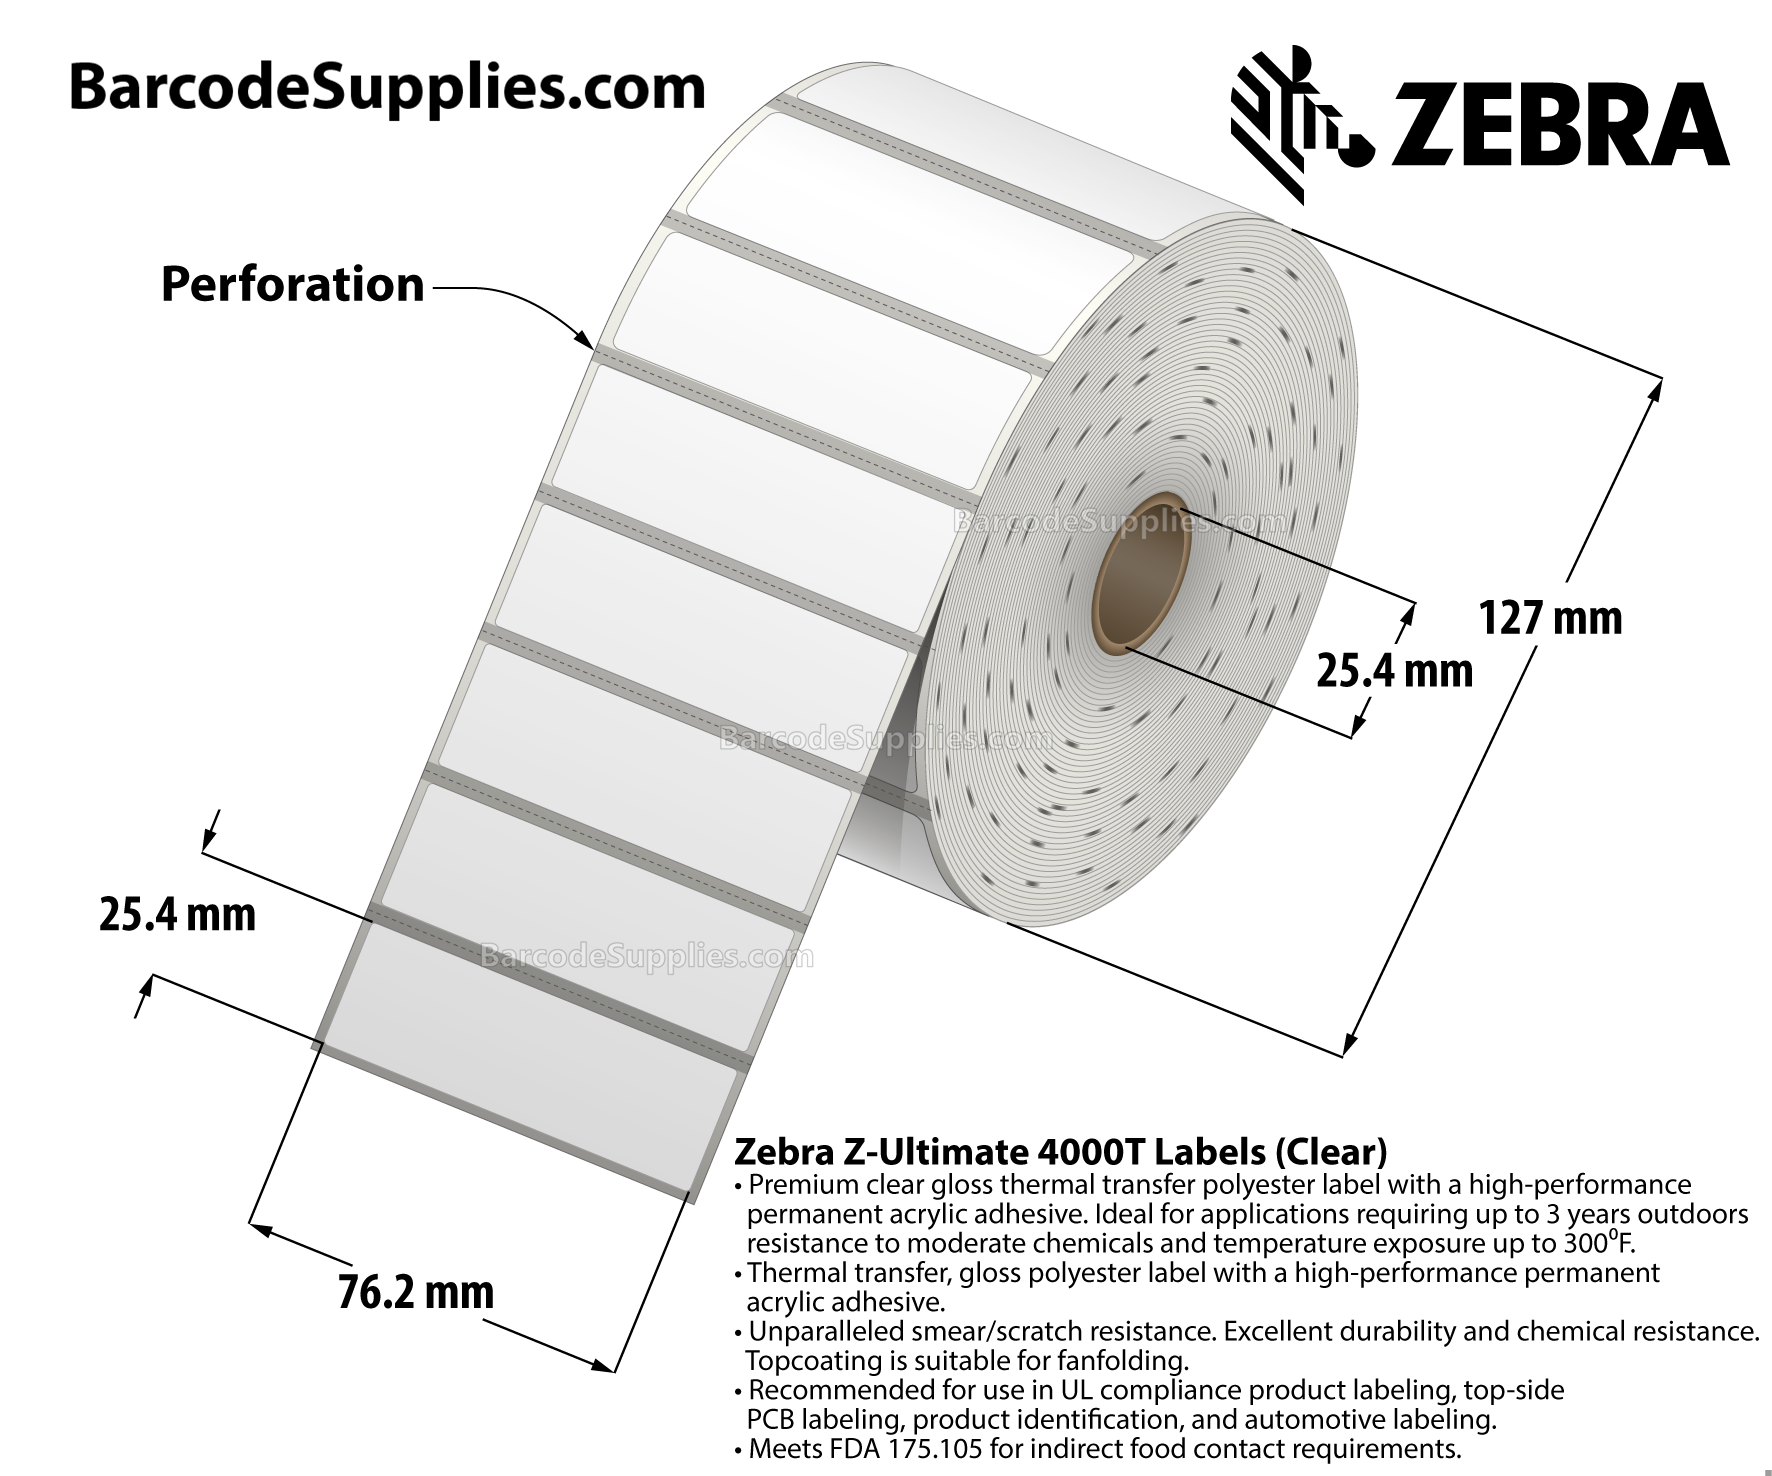 3 x 1 Thermal Transfer Clear Z-Ultimate 4000T Clear Labels With Permanent Adhesive - Black mark sensing - Black Mark - 1500 Labels Per Roll - Carton Of 1 Rolls - 1500 Labels Total - MPN: 10023046